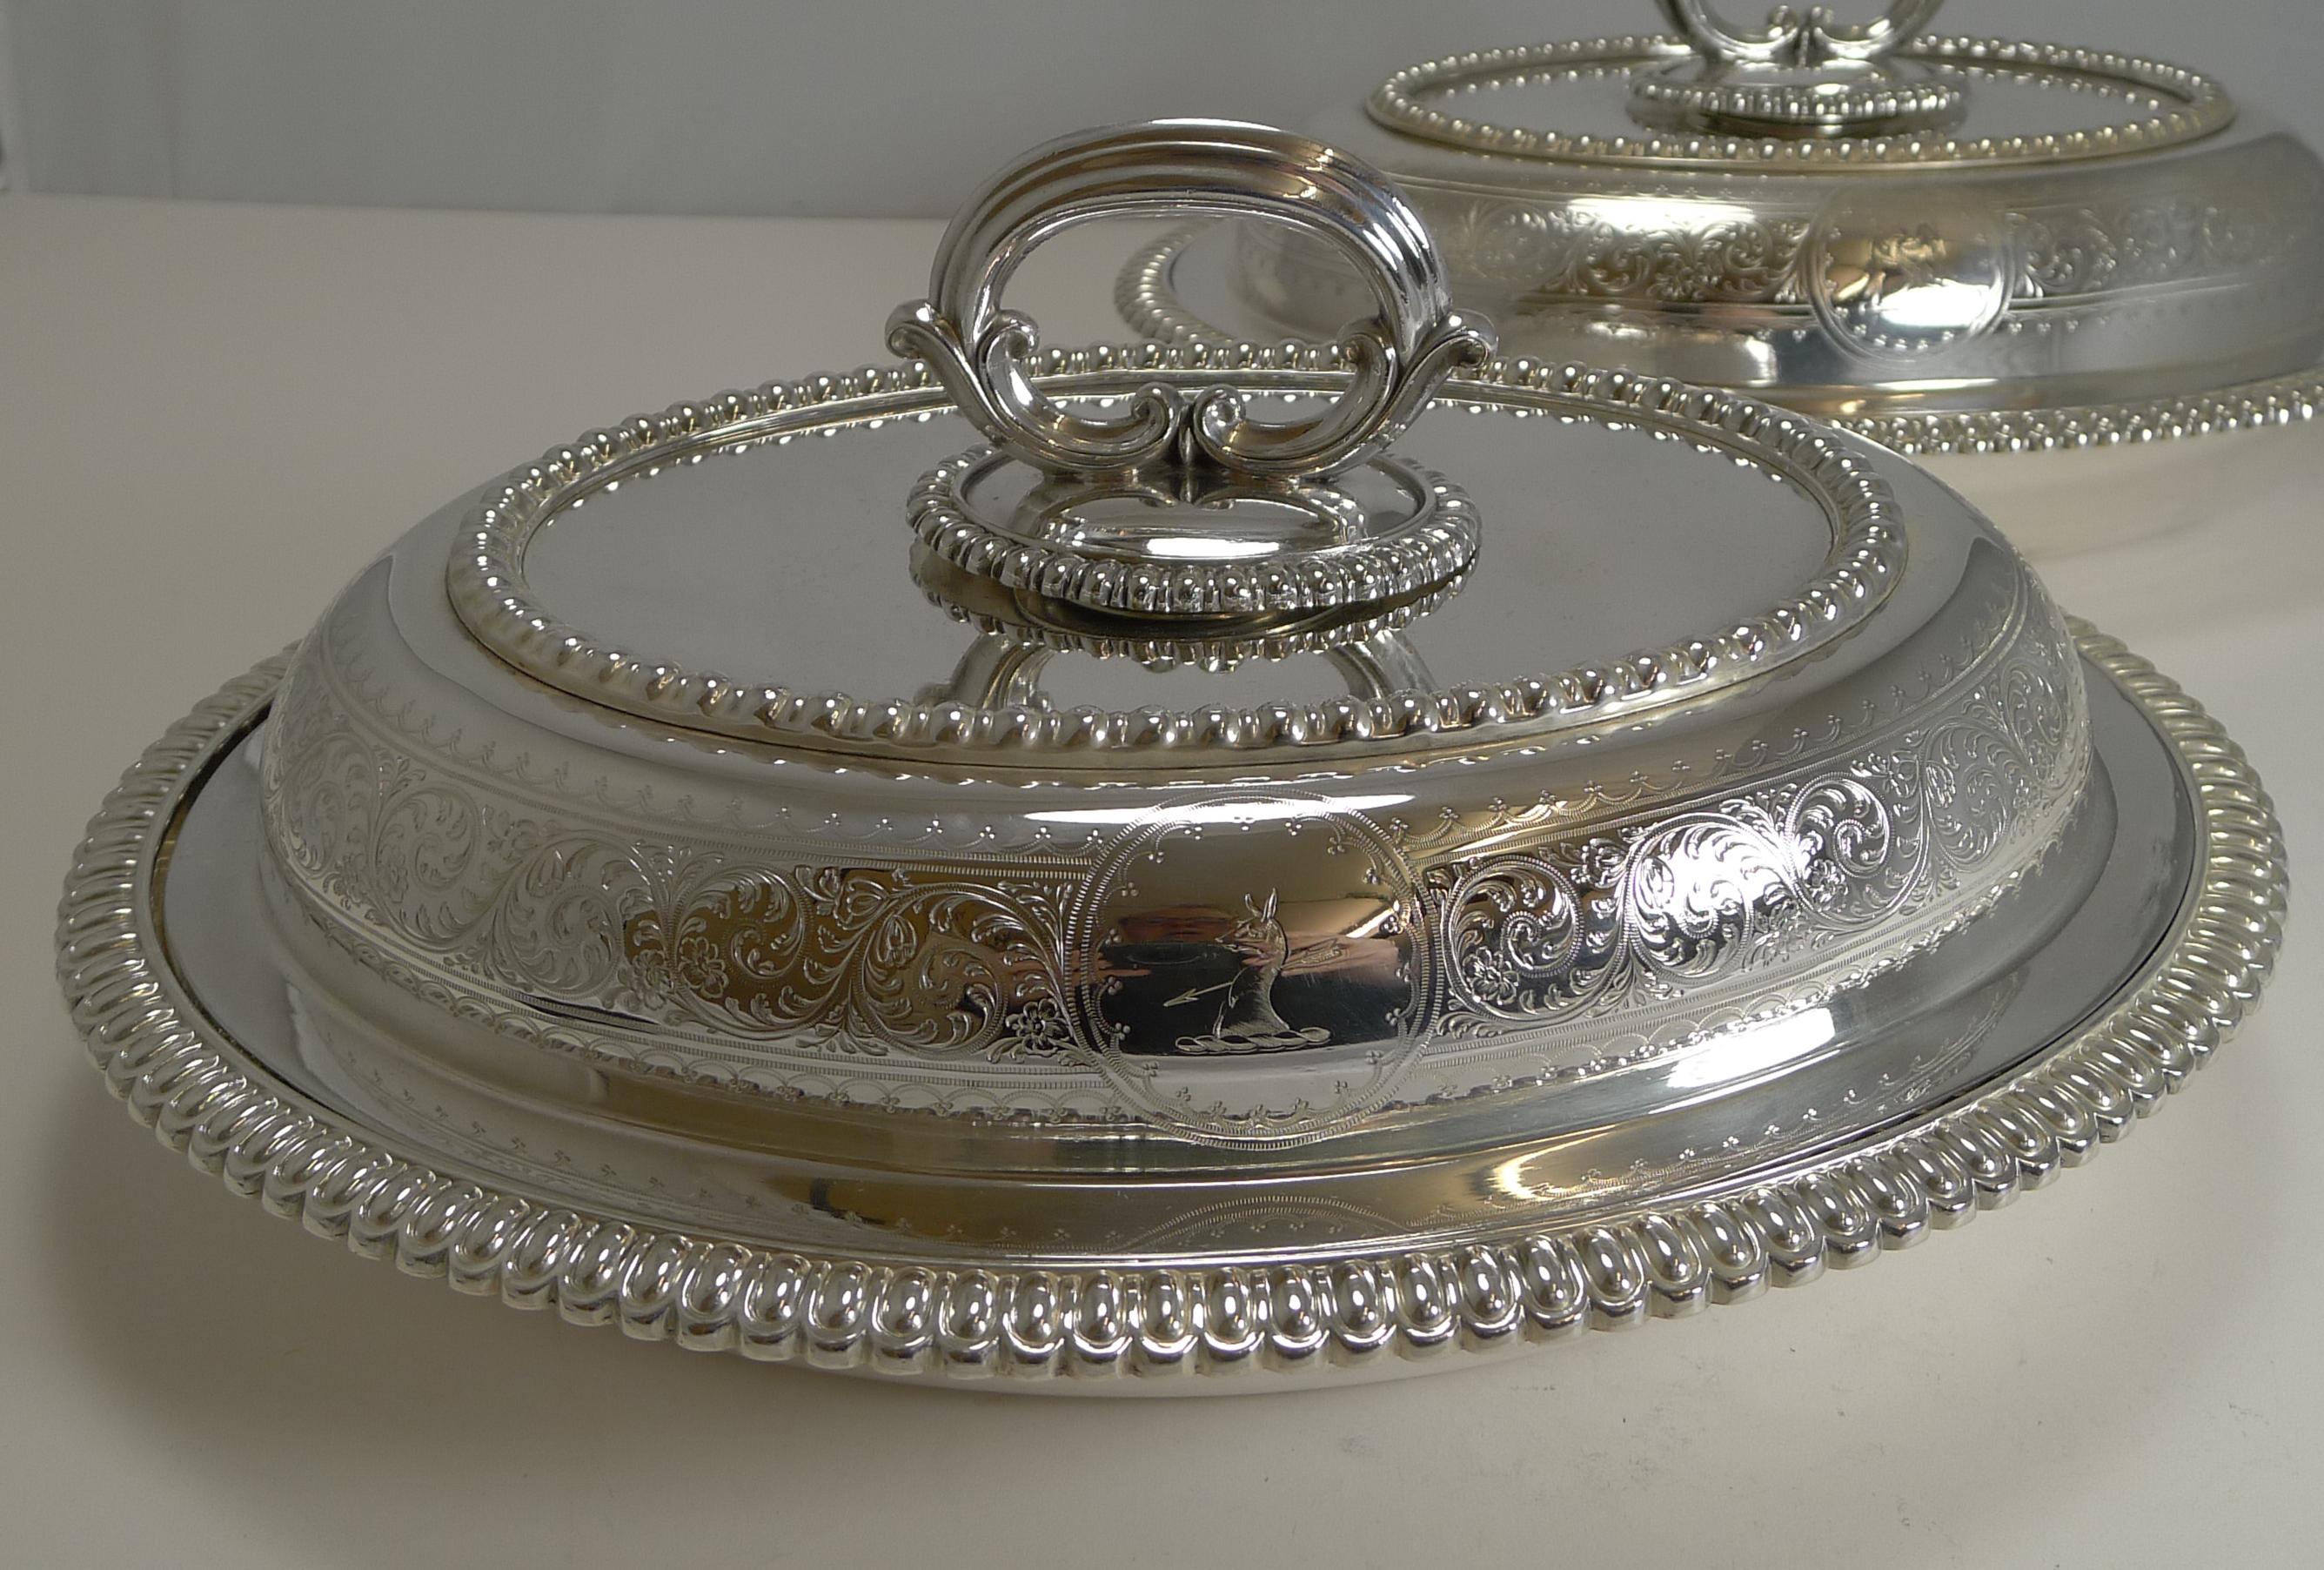 A lovely pair of Victorian entree dishes, made from silver plate by the top-notch silversmith, Elkington and Co. of Birmingham.

Being Elkington, it allows us to date them accurately from the date letter Y for the year 1884.

The removable